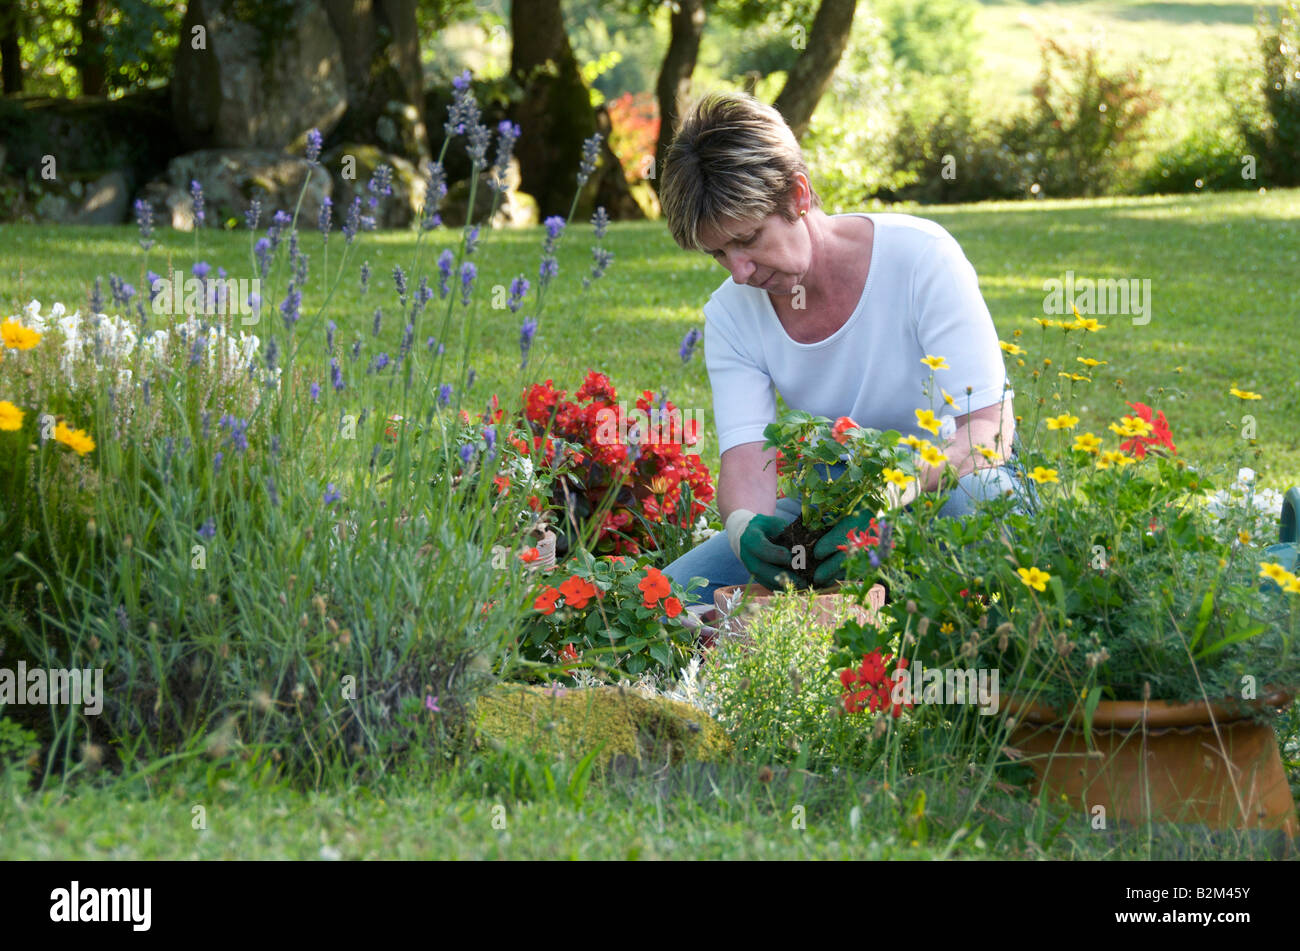 Middle-aged woman gardening in a flower garden in the spring / summer Stock Photo